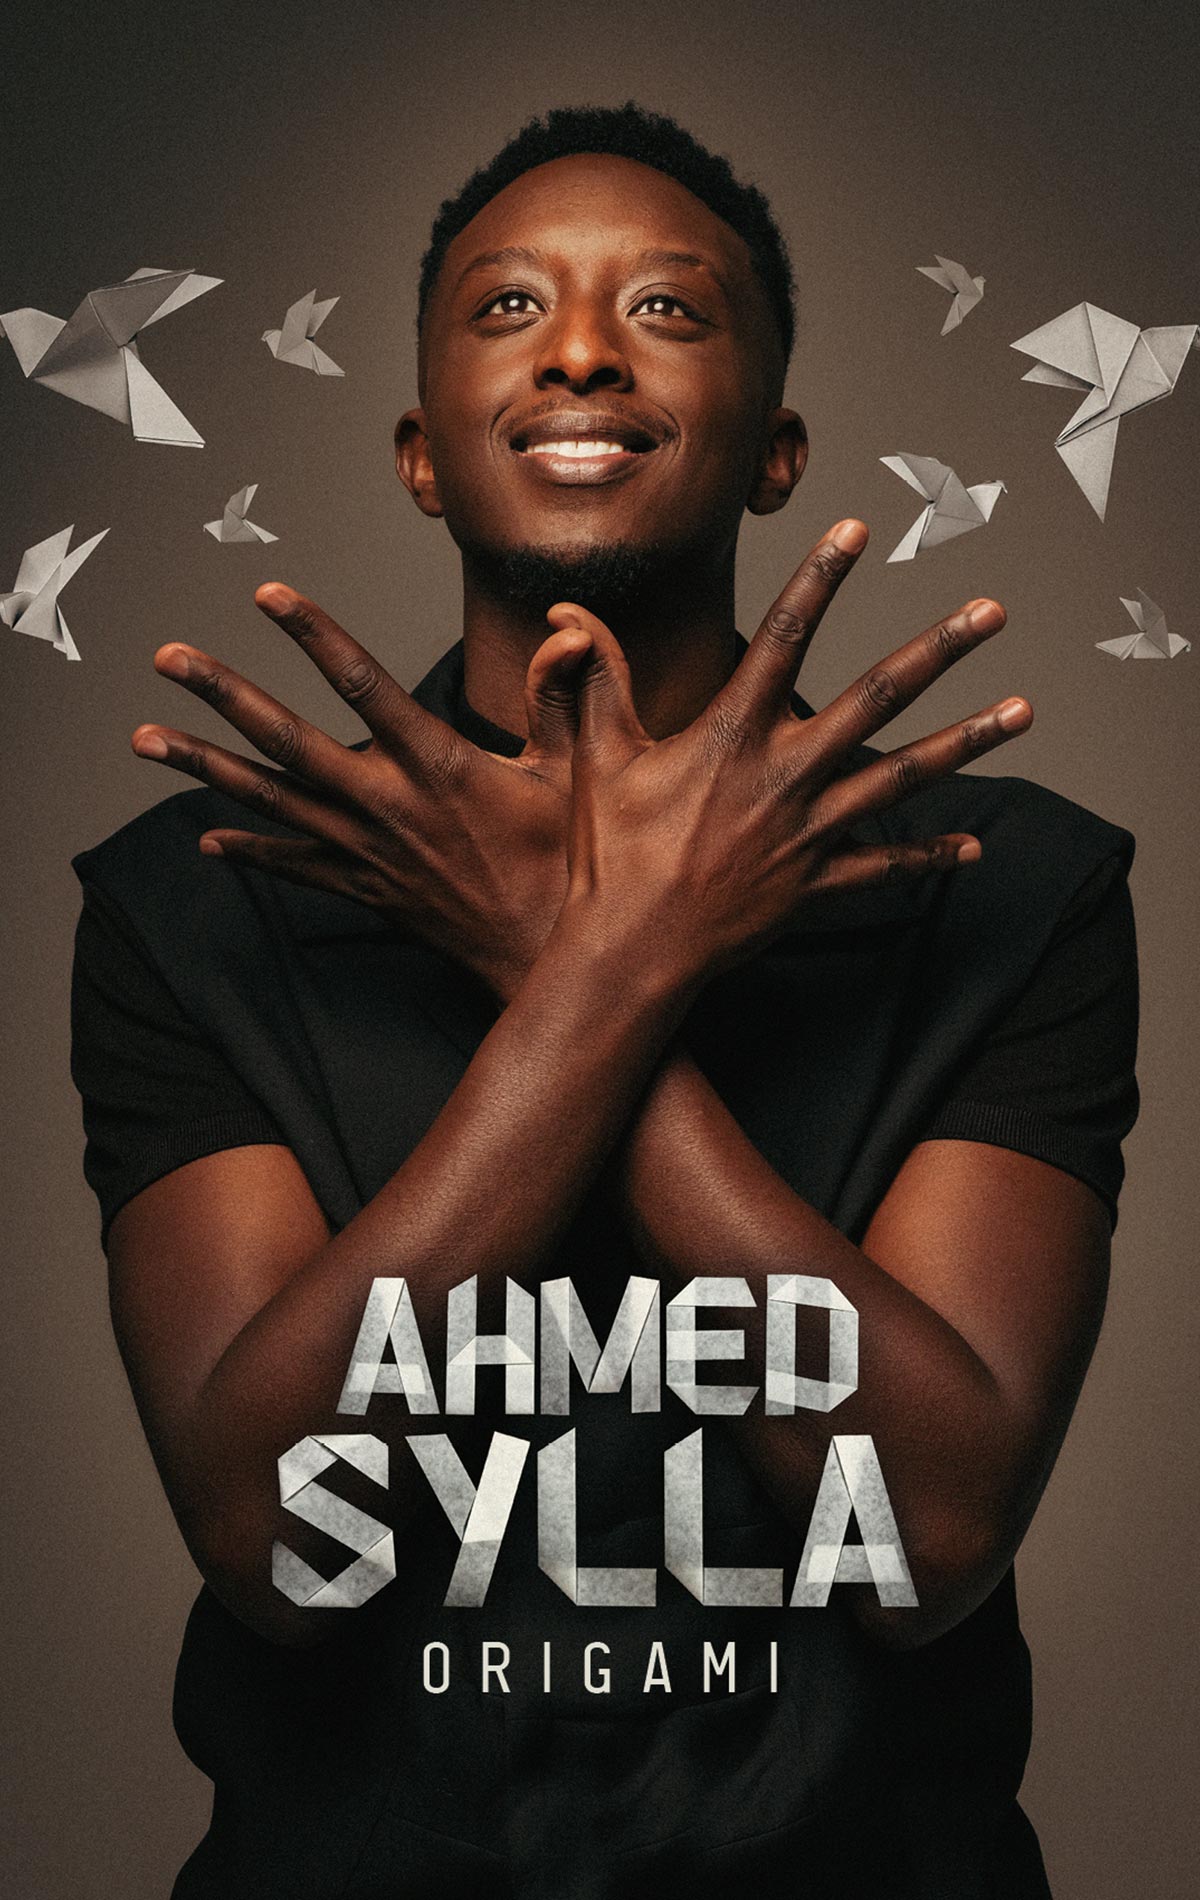 Ahmed Sylla at Zenith Montpellier Tickets